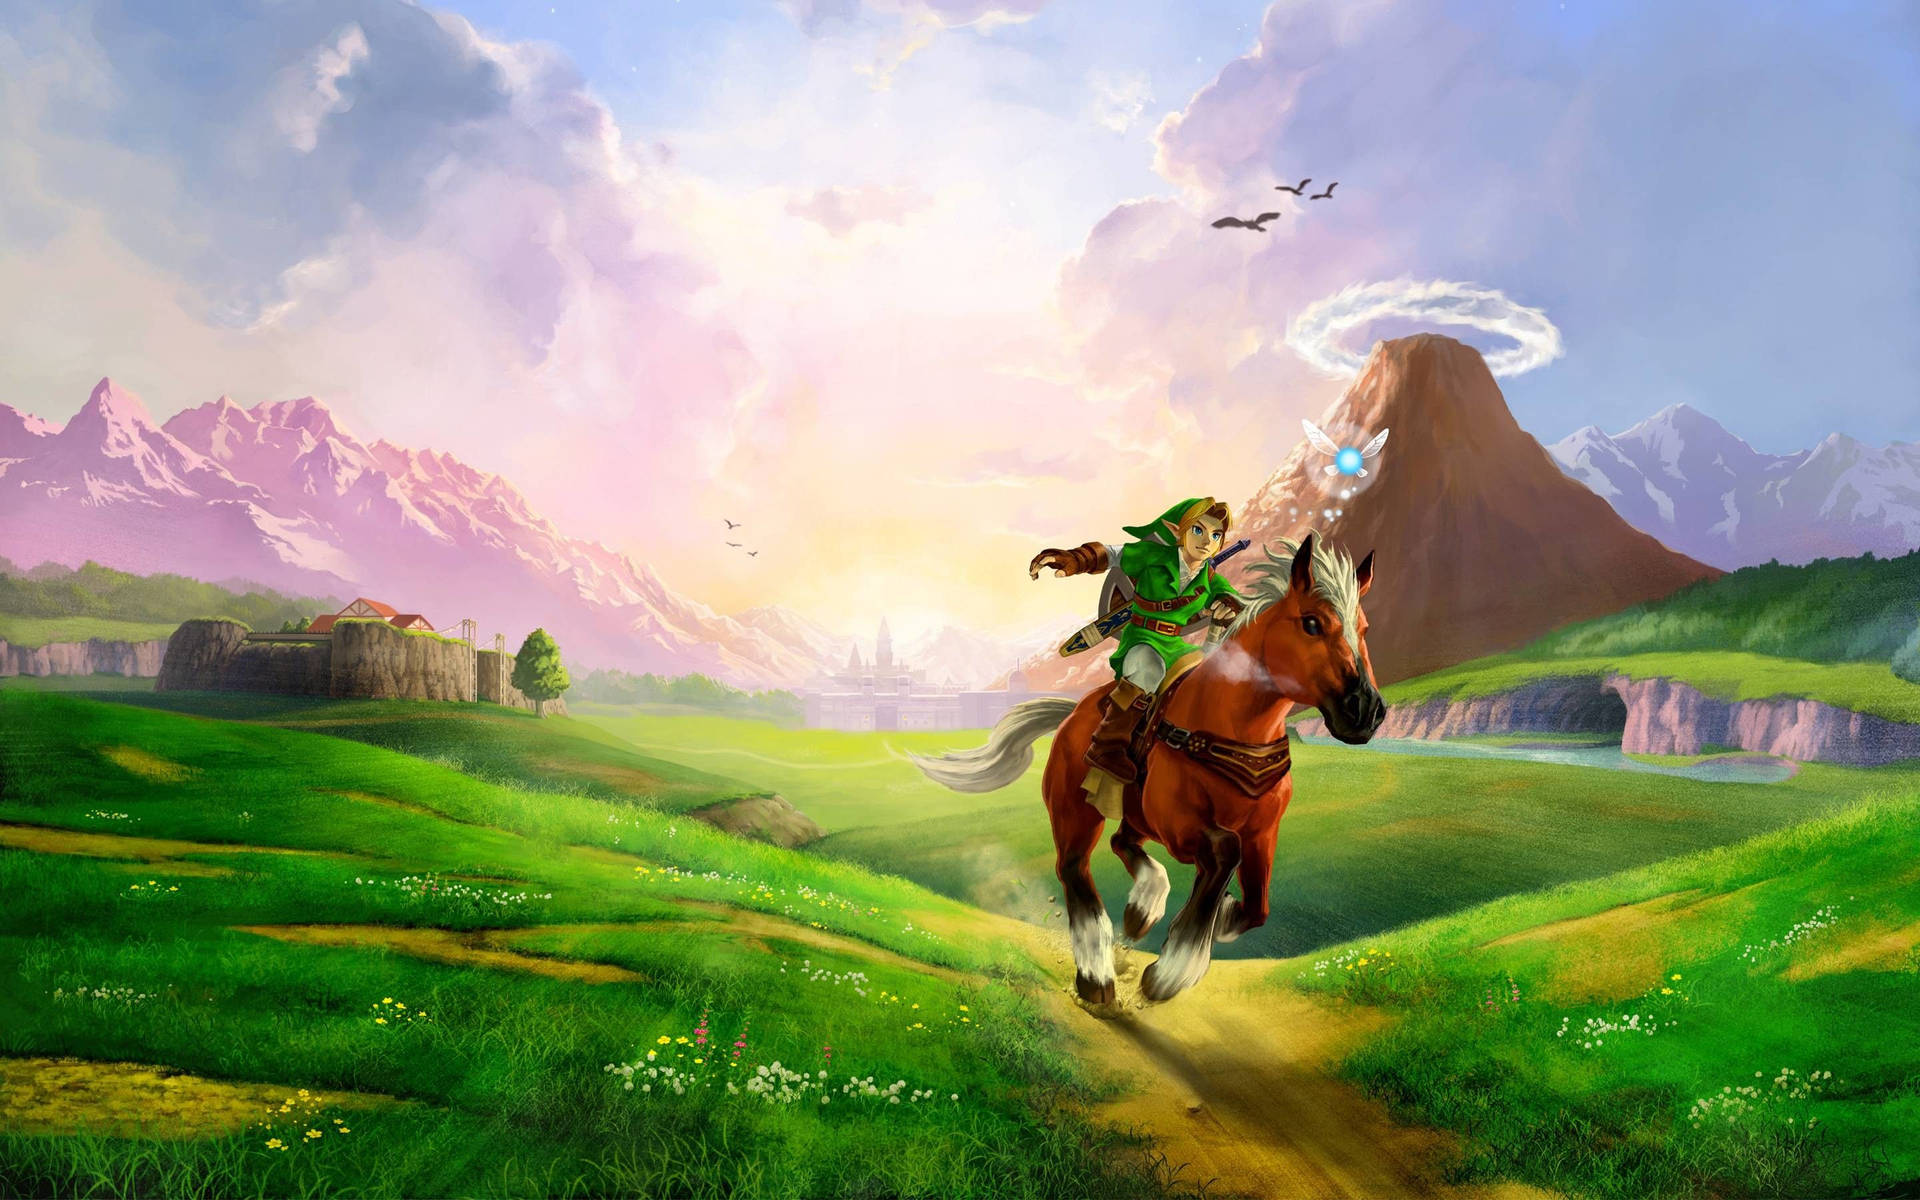 Link and Epona – Brave Companions in their Journey to Defeat Evil in The Legend of Zelda Wallpaper